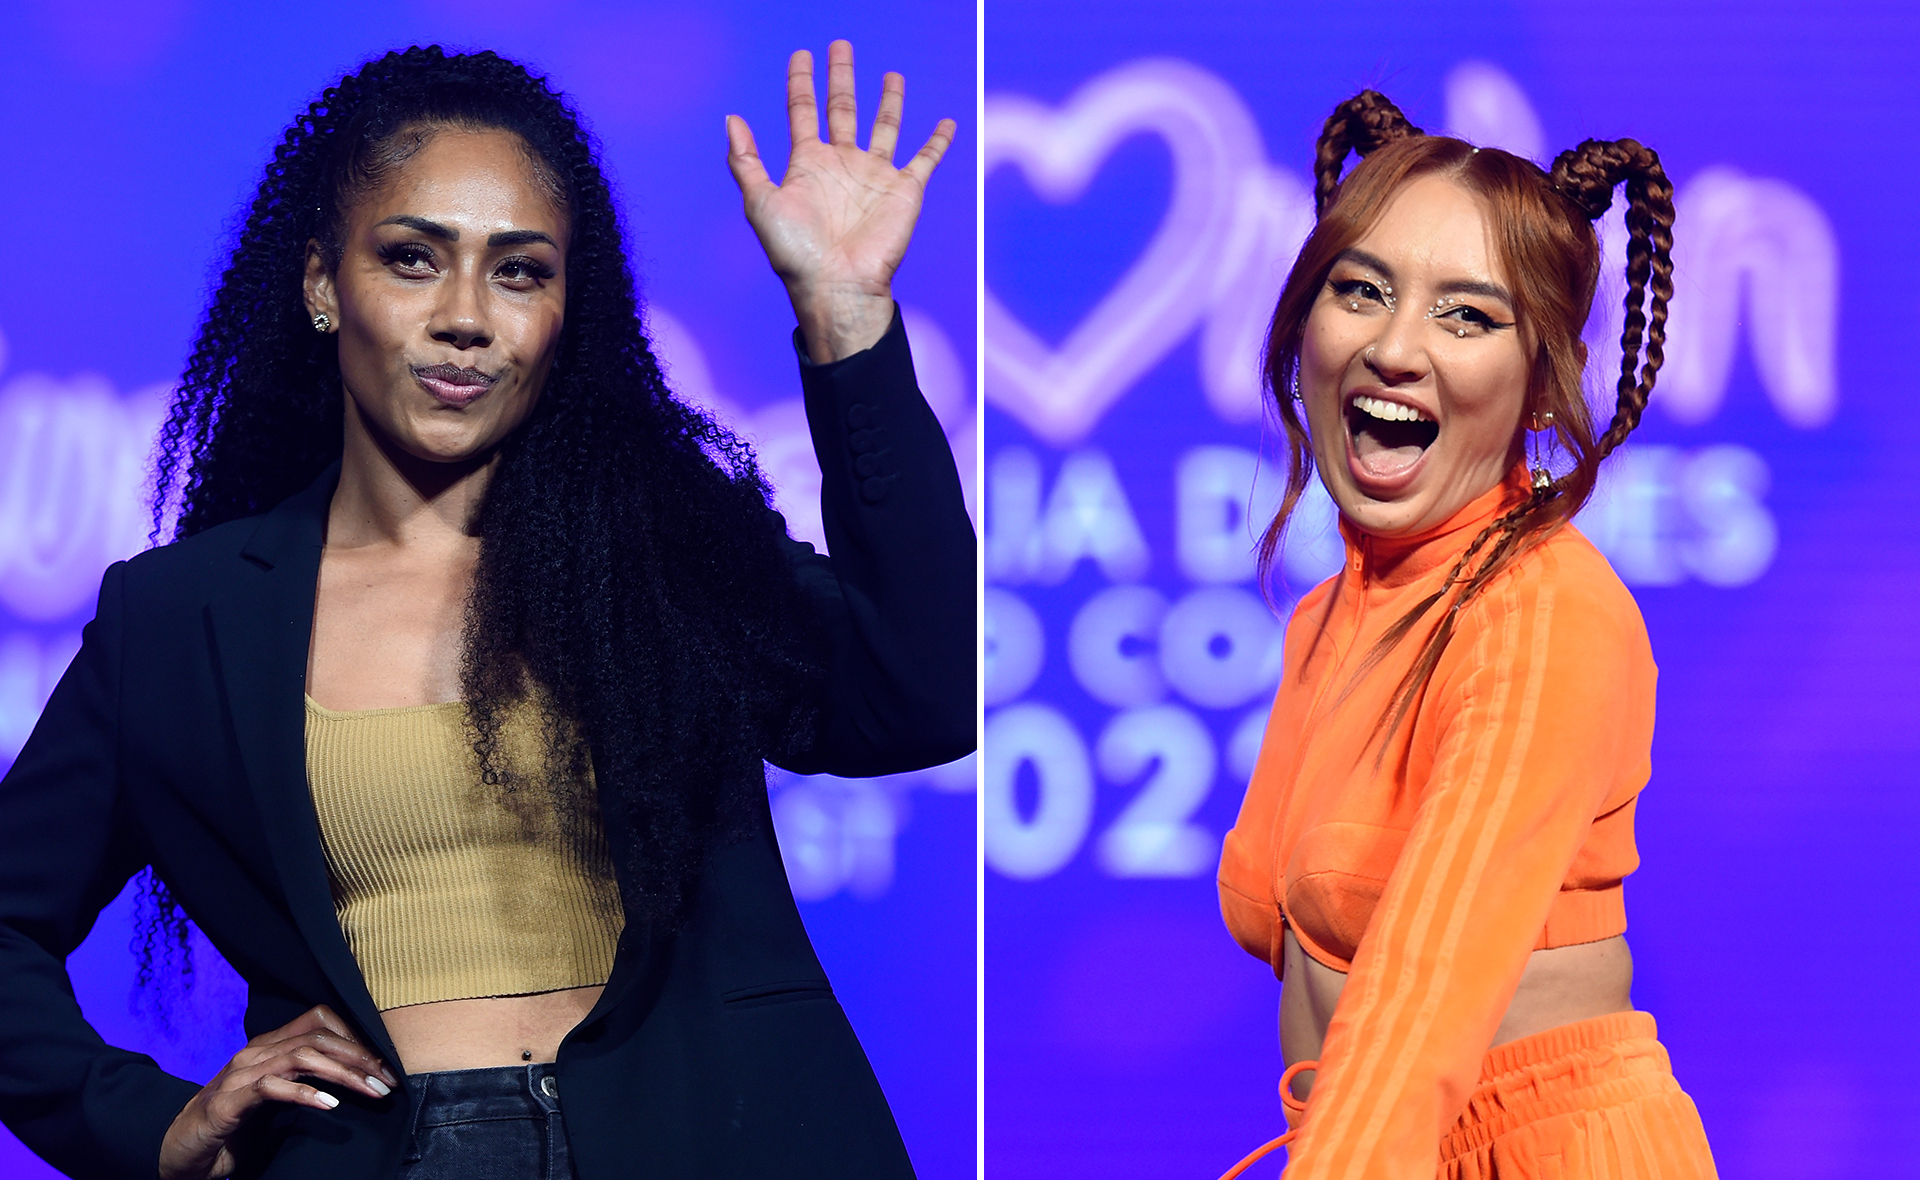 What can we expect from Eurovision – Australia Decides 2022? Capes, sparkles and pyrotechnics galore